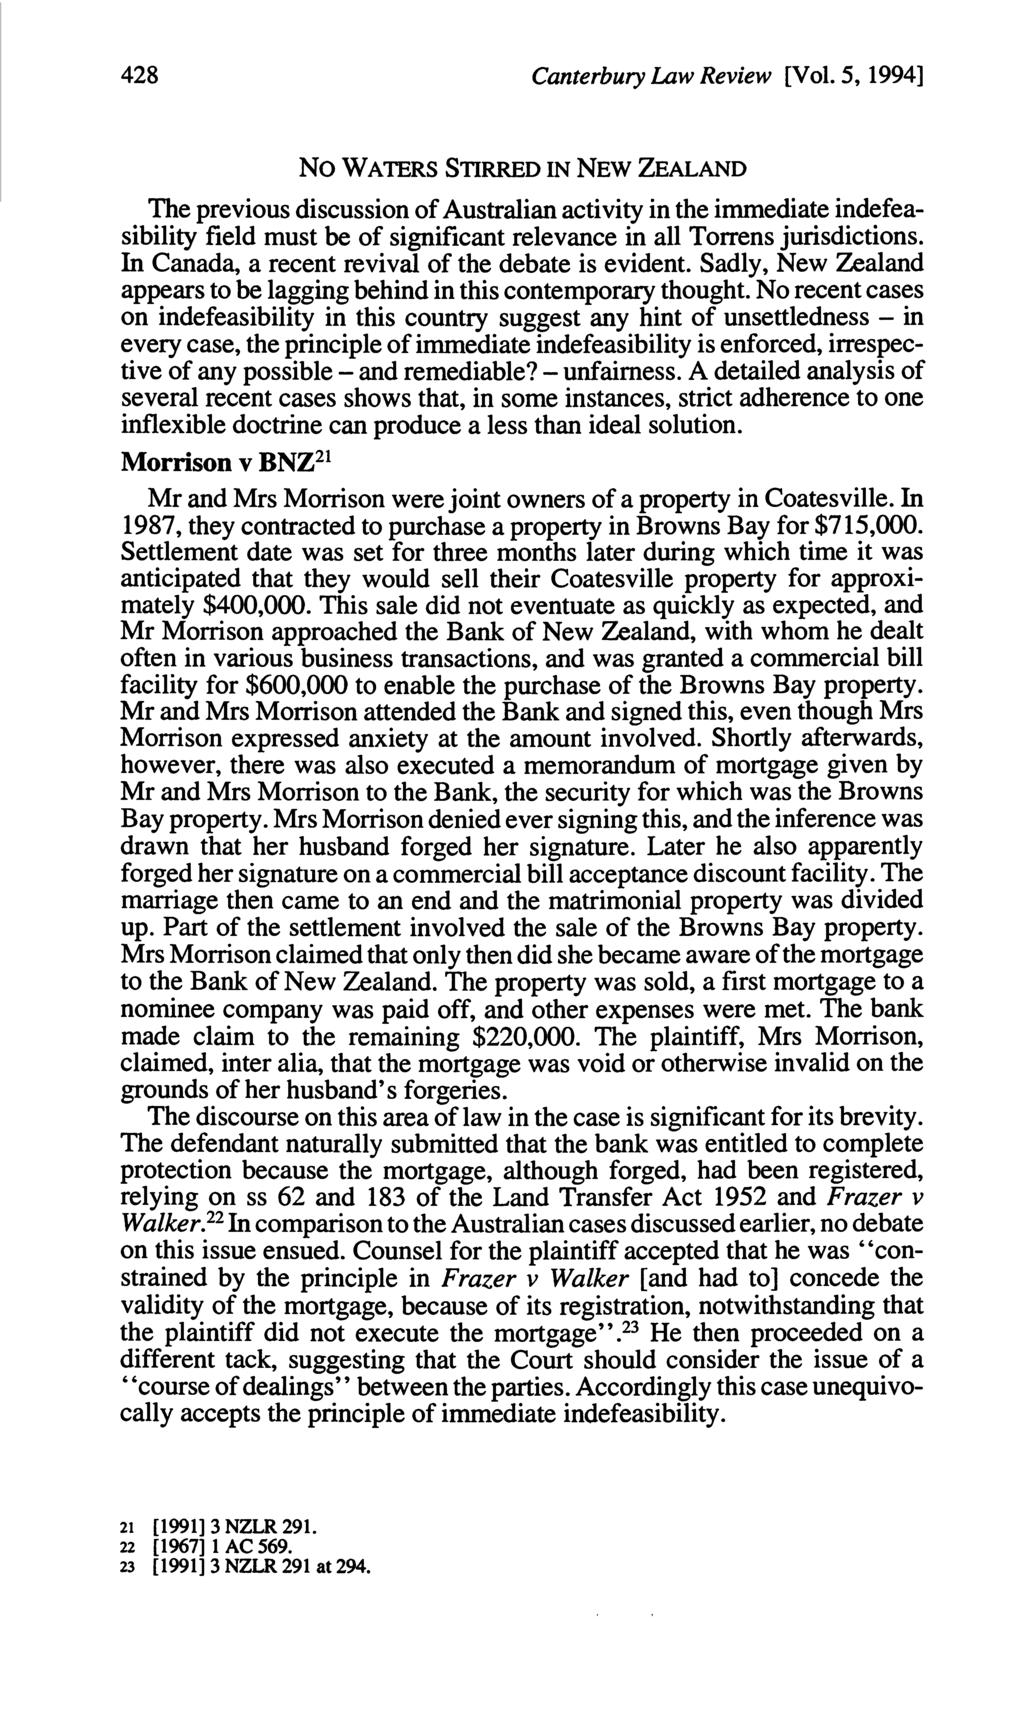 428 Canterbury Law Review [Vol. 5, 19941 The previous discussion of Australian activity in the immediate indefeasibility field must be of significant relevance in all Torrens jurisdictions.